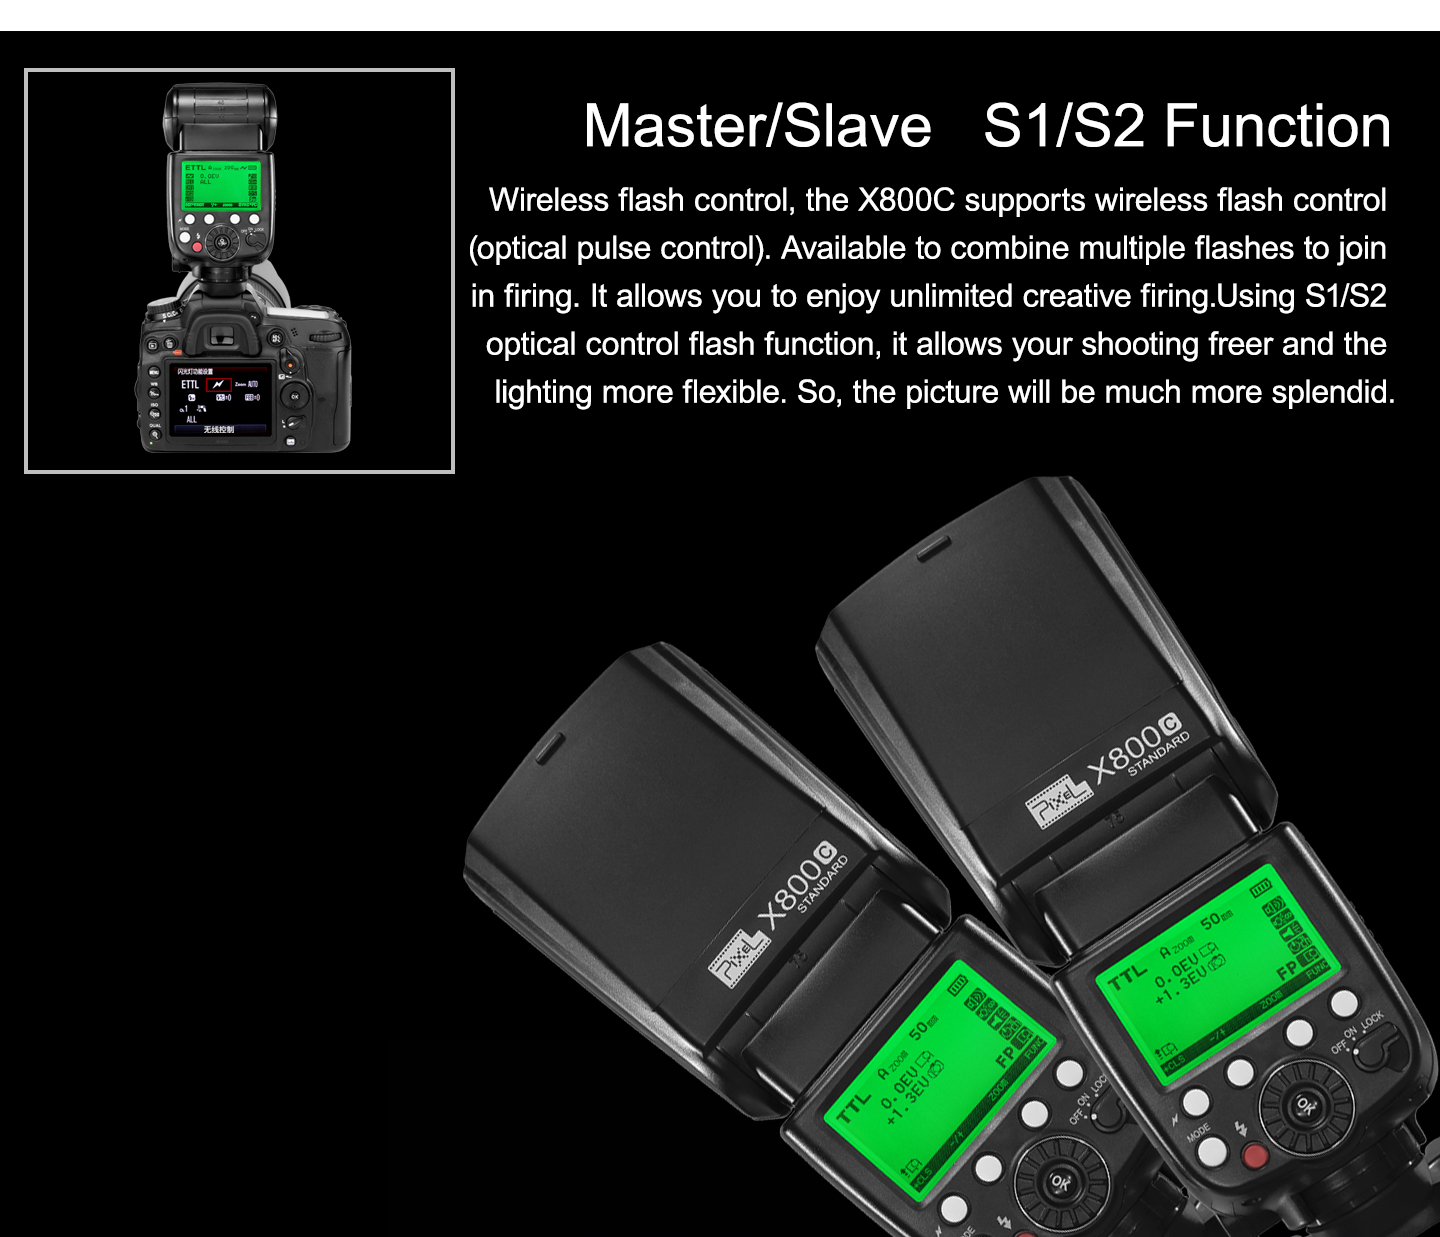 Master/Slave S1/S2 Function